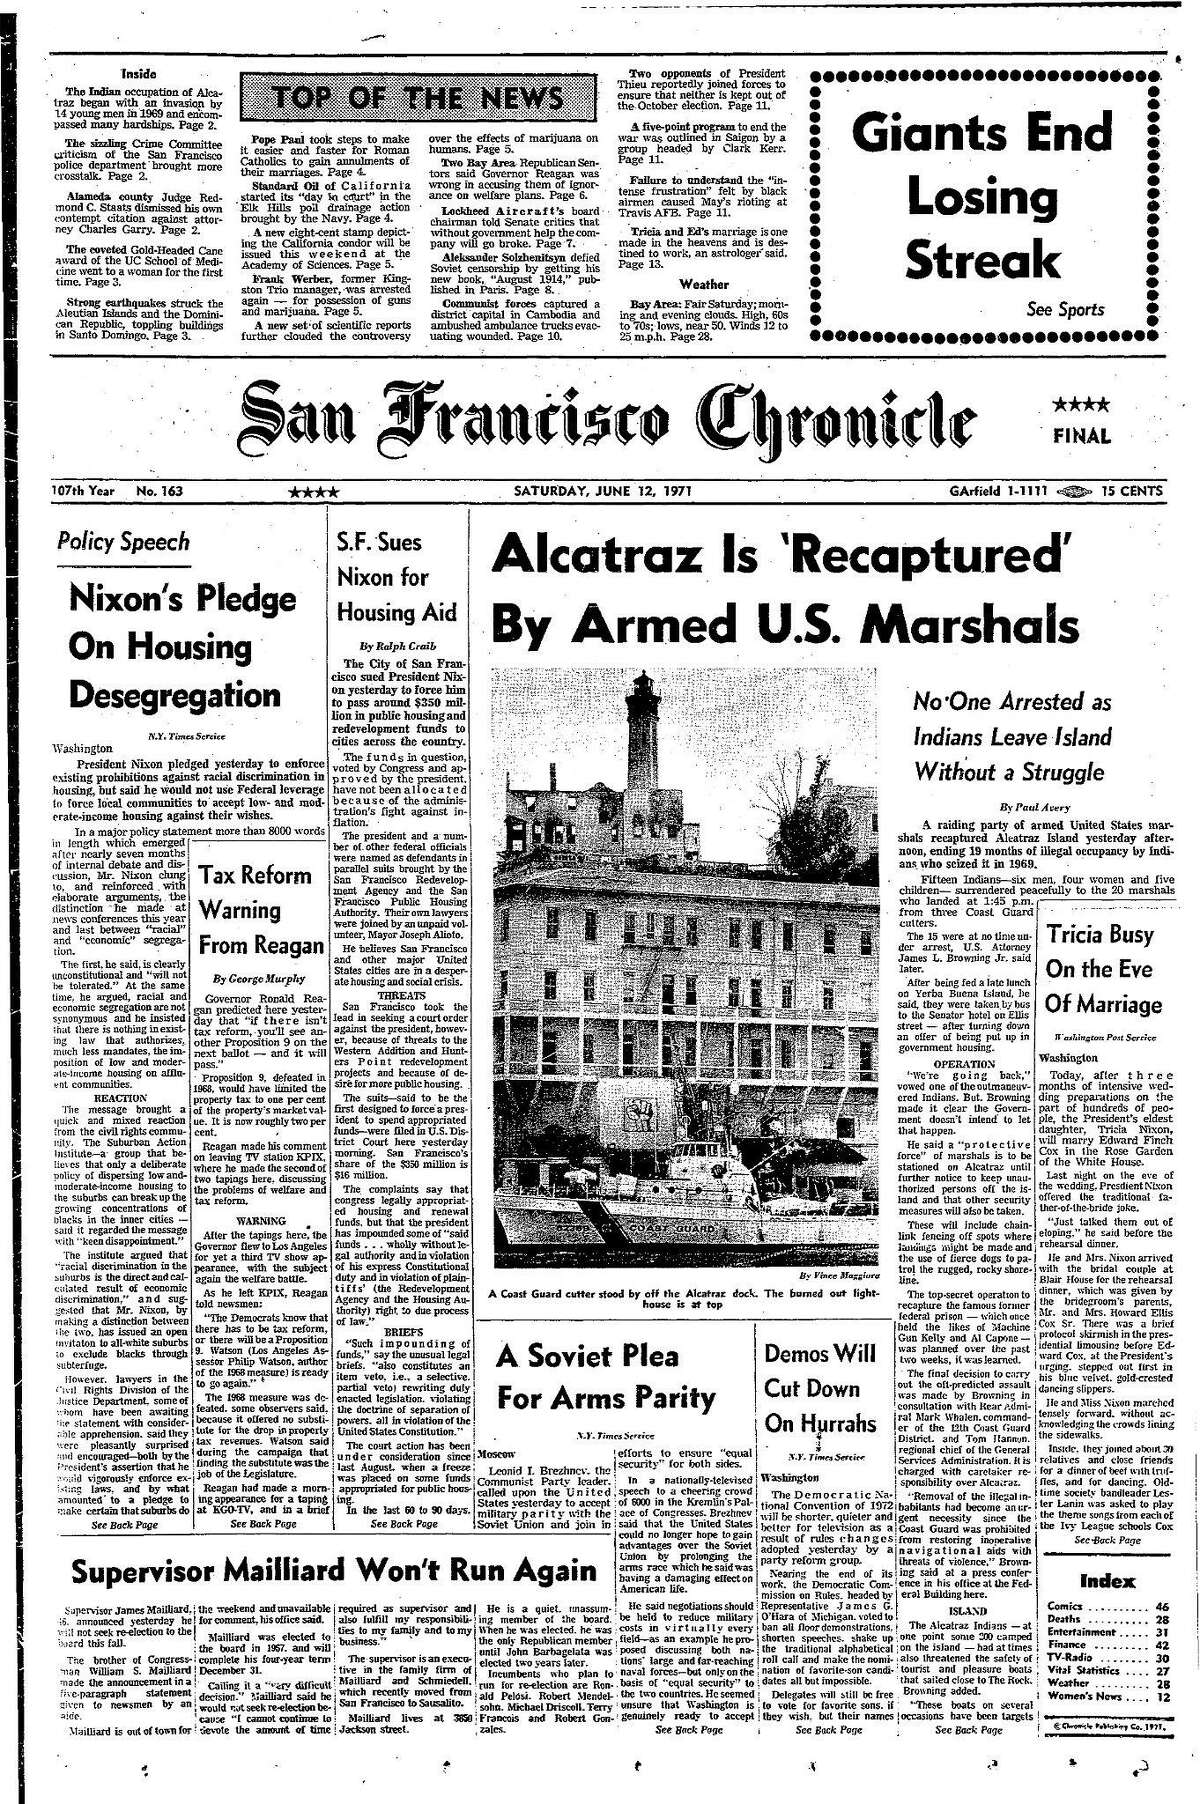 Historic Chronicle Front Page June 12, 1971 Alcatraz retaken by U.S. Marshalls, ni one arrested as Indians leave island without a struggle Chron365, Chroncover